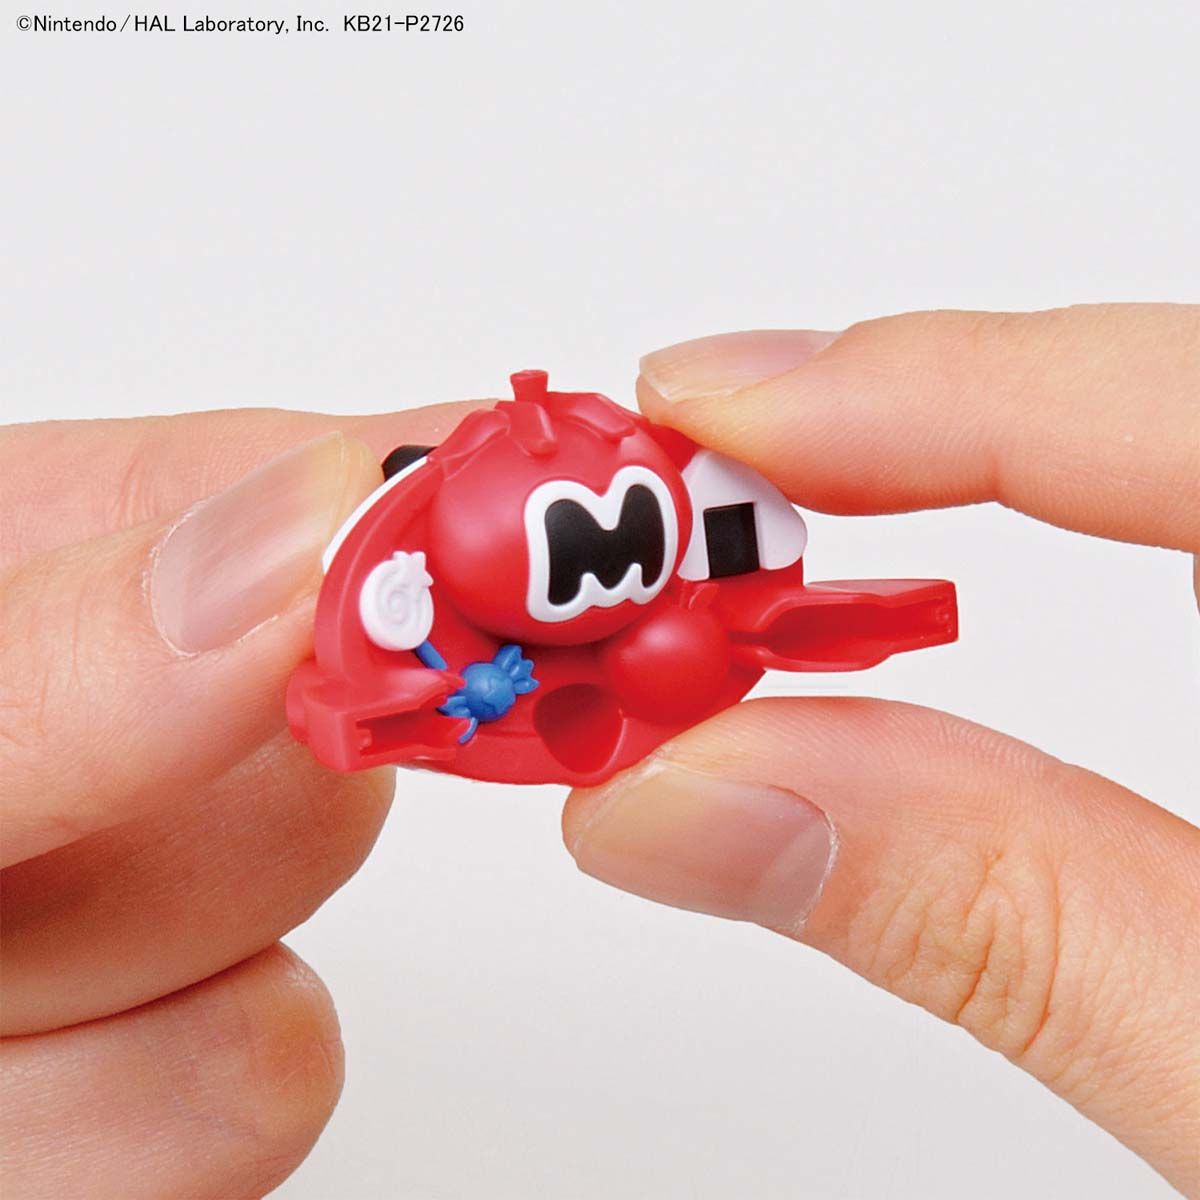 Kirby - ENTRY GRADE Model Kit (Bandai), Beginner-friendly Kirby model kit with face color separation parts like Maxim Tomato and rice balls. Easy assembly with touch gate feature, no adhesive or tools required. Comes with Warp Star-shaped base. Includes 4 runners, instruction manual, and foil seal. Franchise: Kirby, Brand: Bandai, Release Date: 2021-06-19. Sold at Nippon Figures.